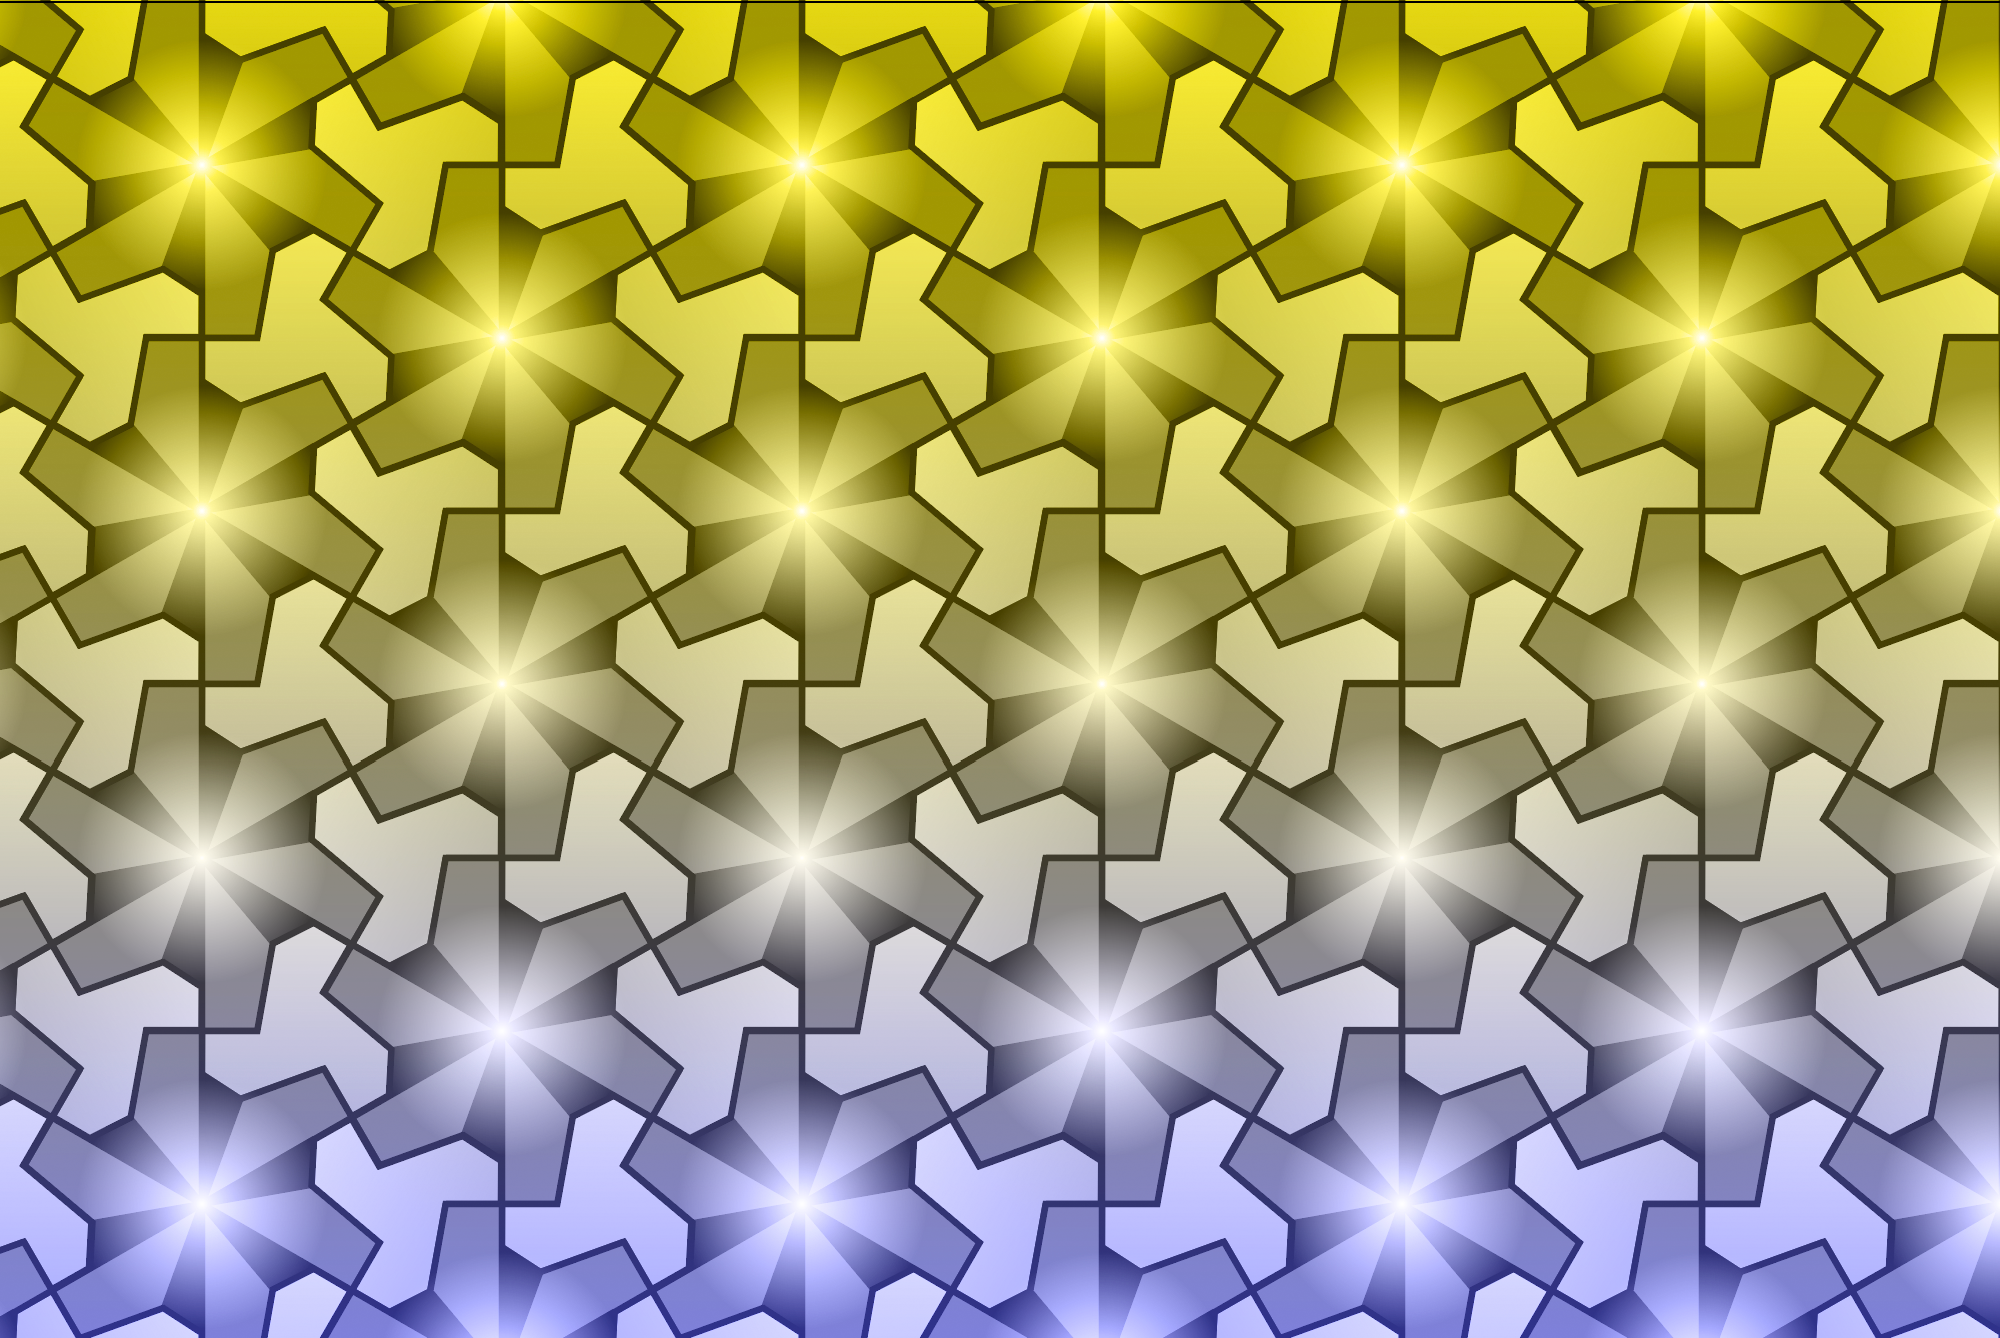 A repeating pattern with color fading from yellow to blue